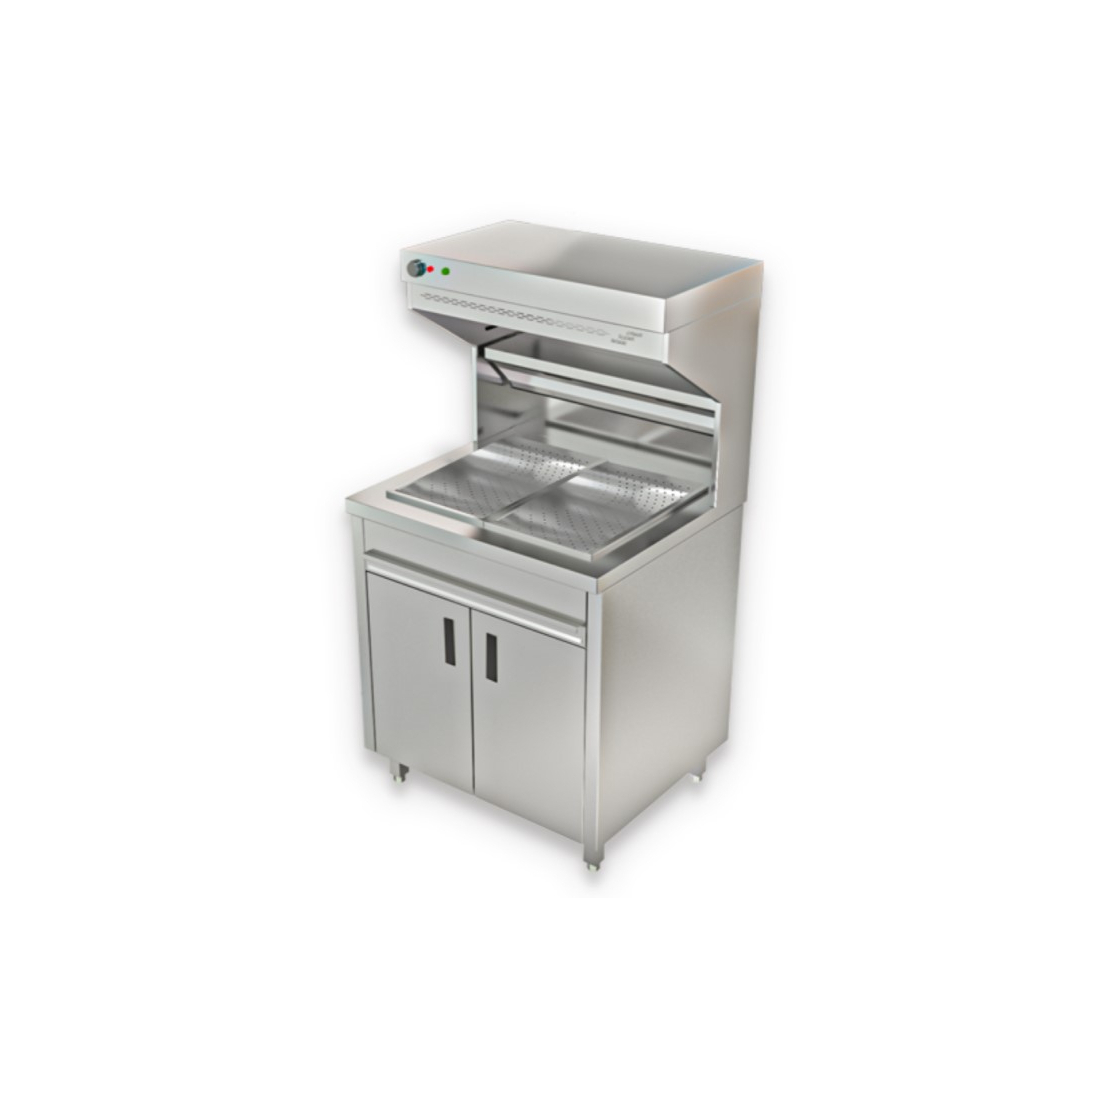 Fiamma ,FMA040, French frise bagger with light heater 80cm|mkayn|مكاين